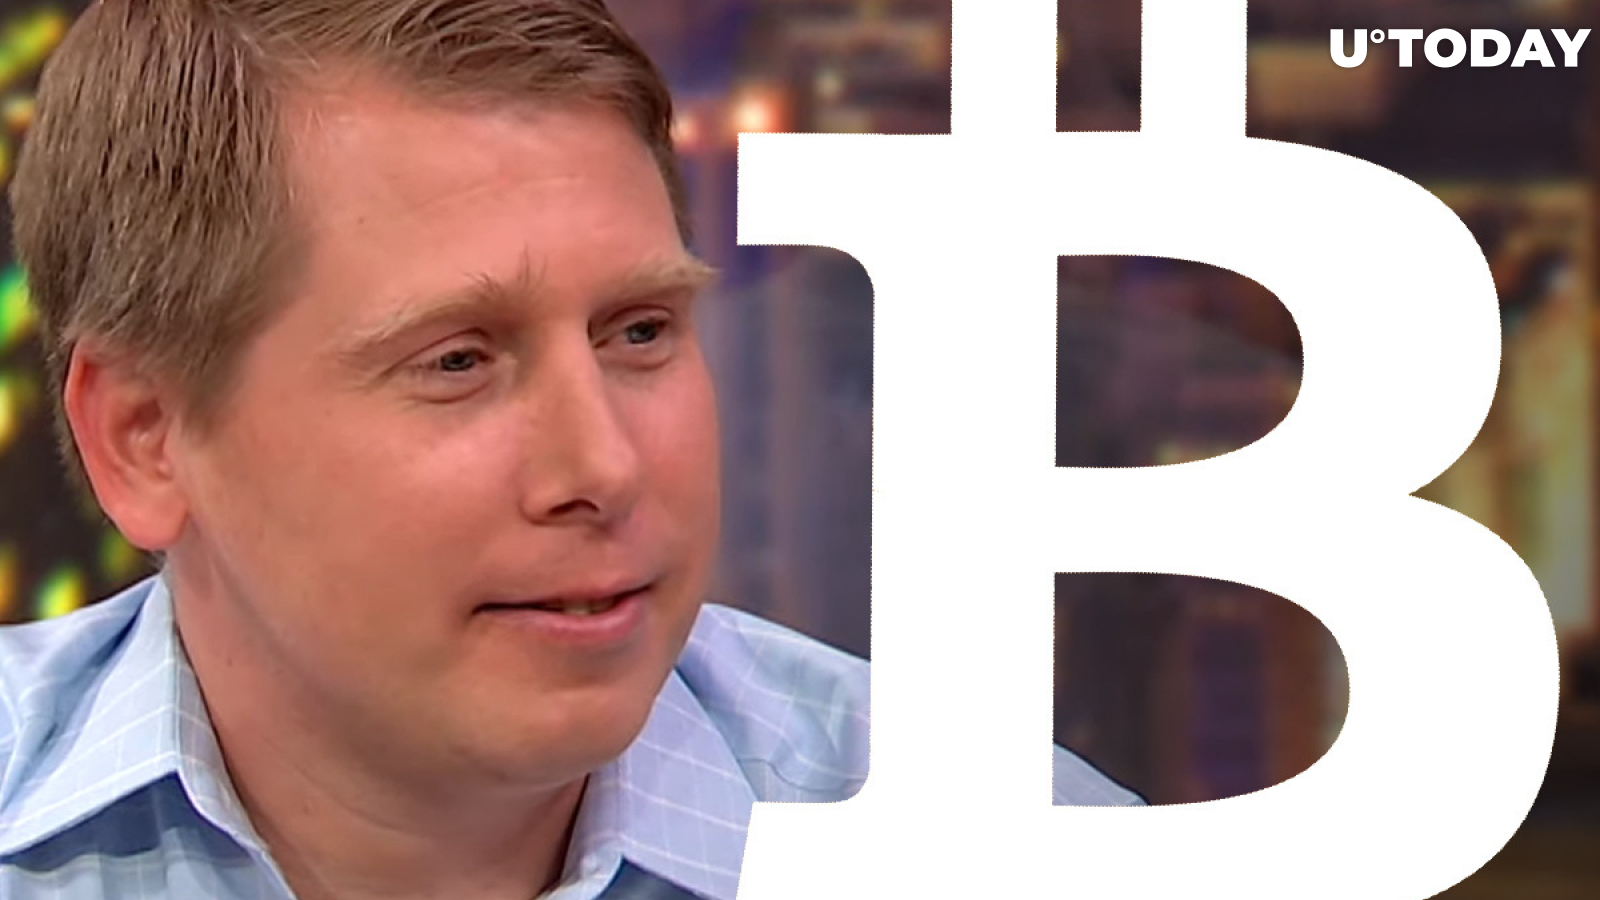 Digital Currency Group’s Barry Silbert Warns of “Dicey” Week as Bitcoin Struggles to Gain Footing Above $35,000  